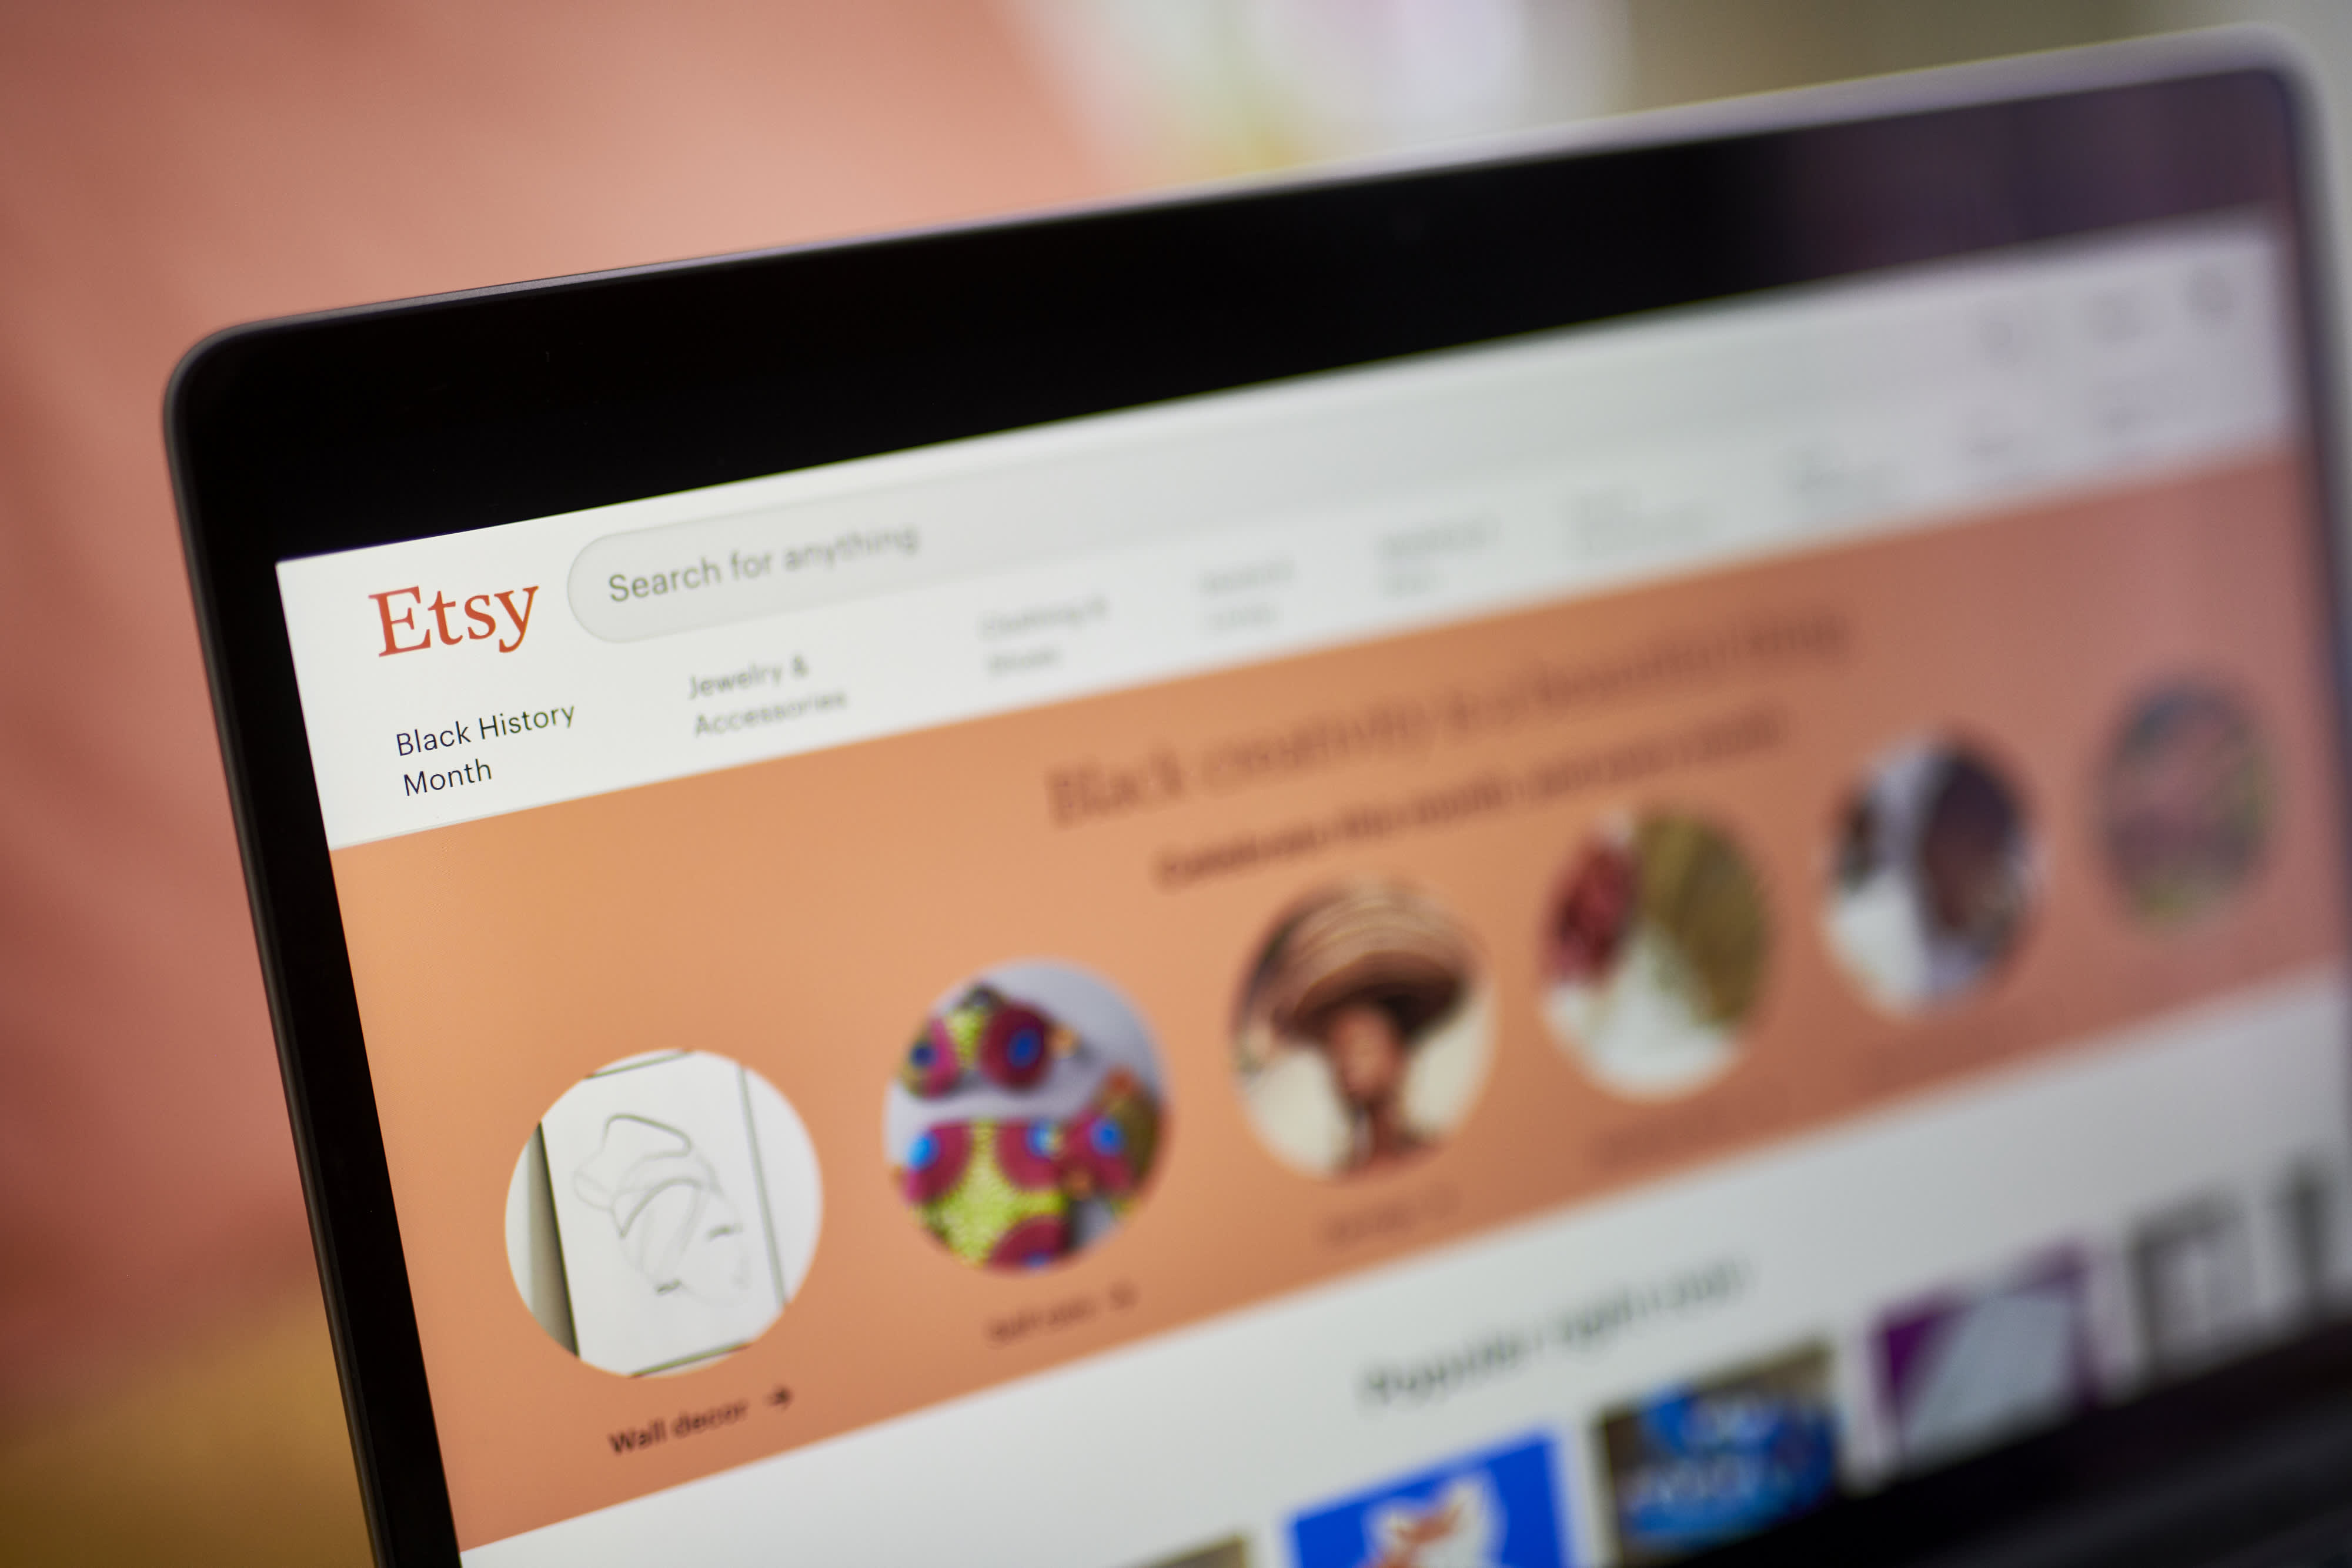 Jefferies double downgrades Etsy, sees stock tumbling 25% as consumer spending slows